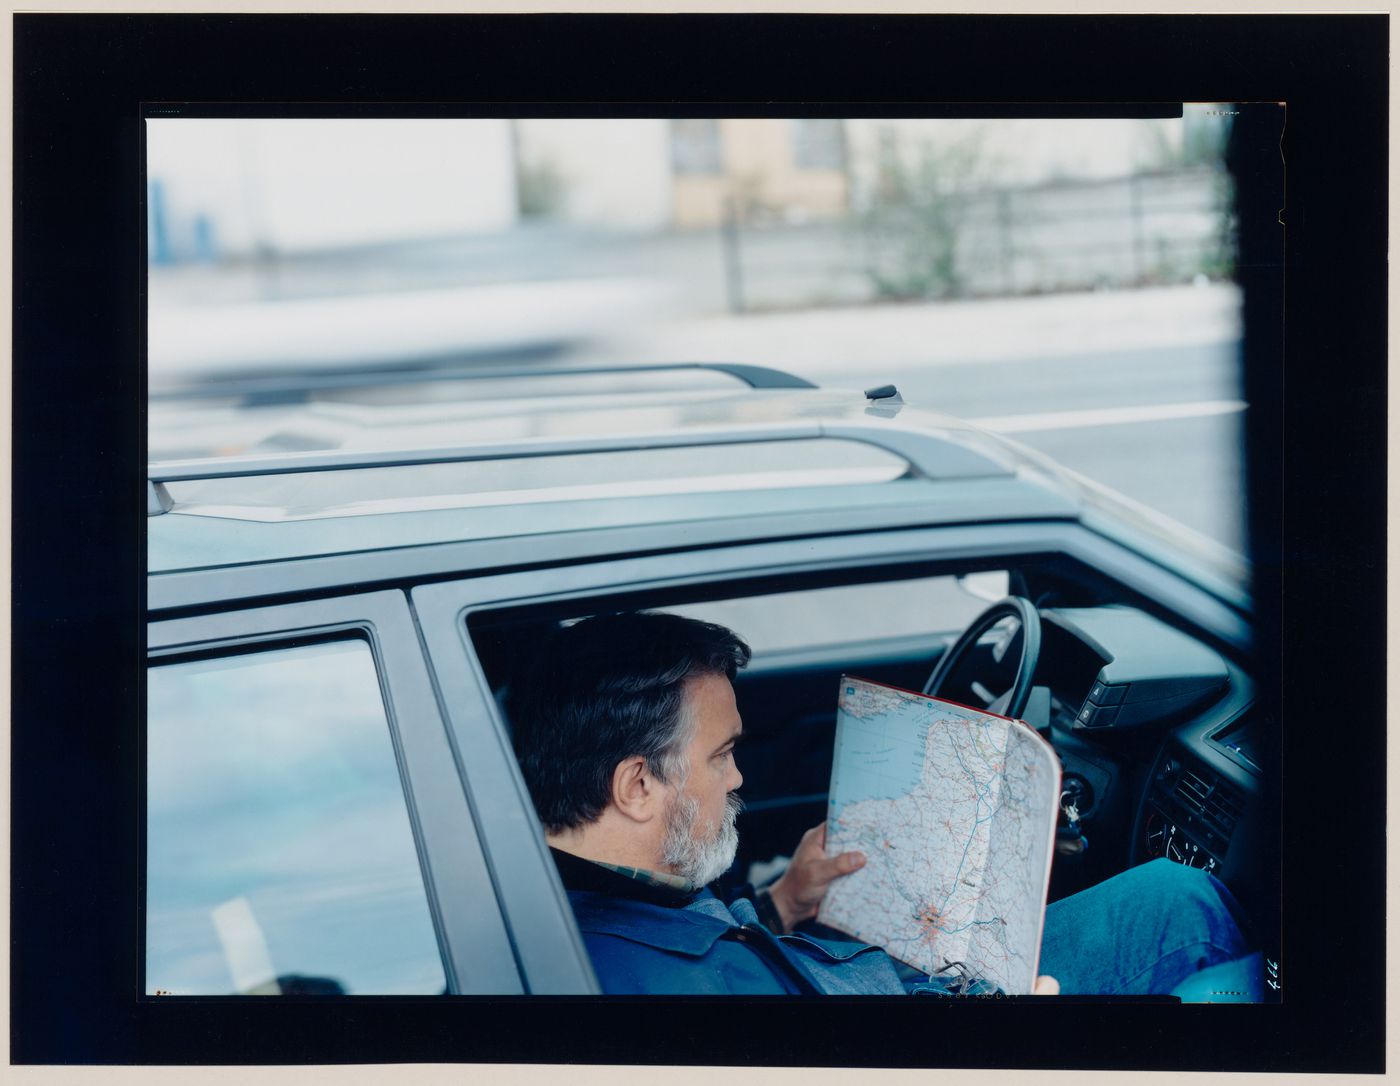 Portrait of a man reading a road map while sitting in a car, Saint-Denis, France (from the series "In between cities")